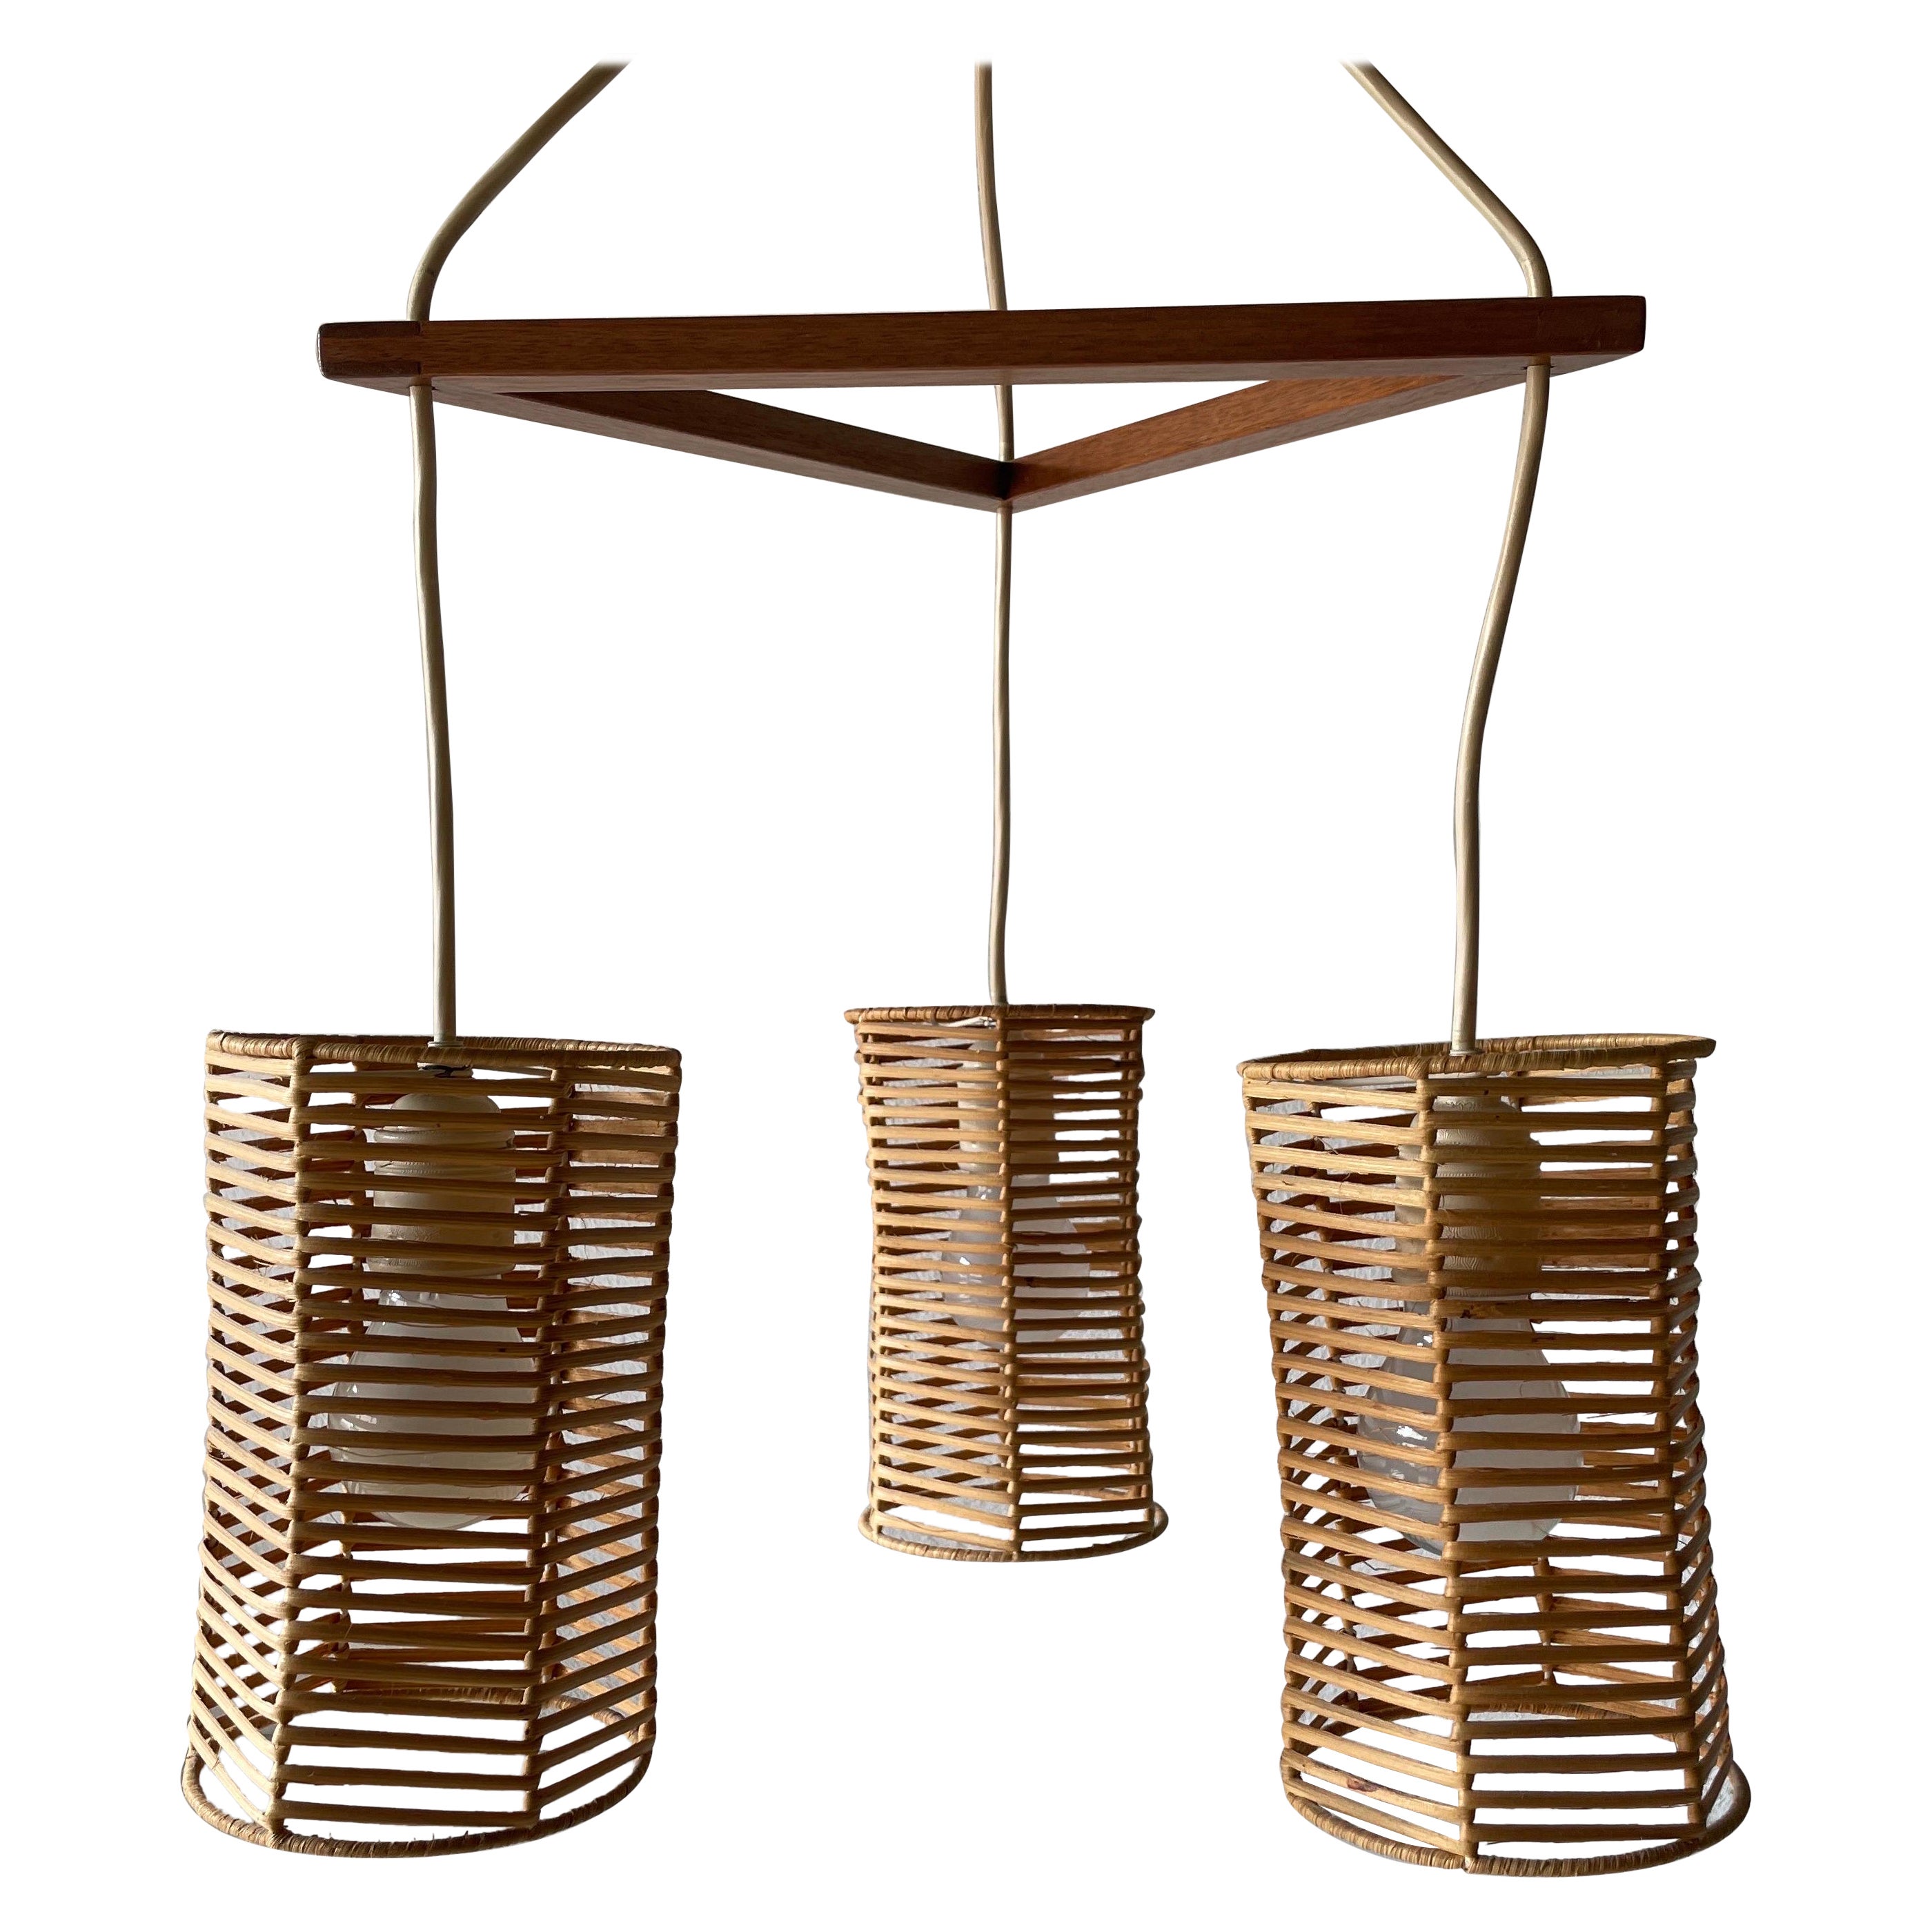 Triple Shade Wicker and Wood Pendant Lamp, 1960s, Germany For Sale